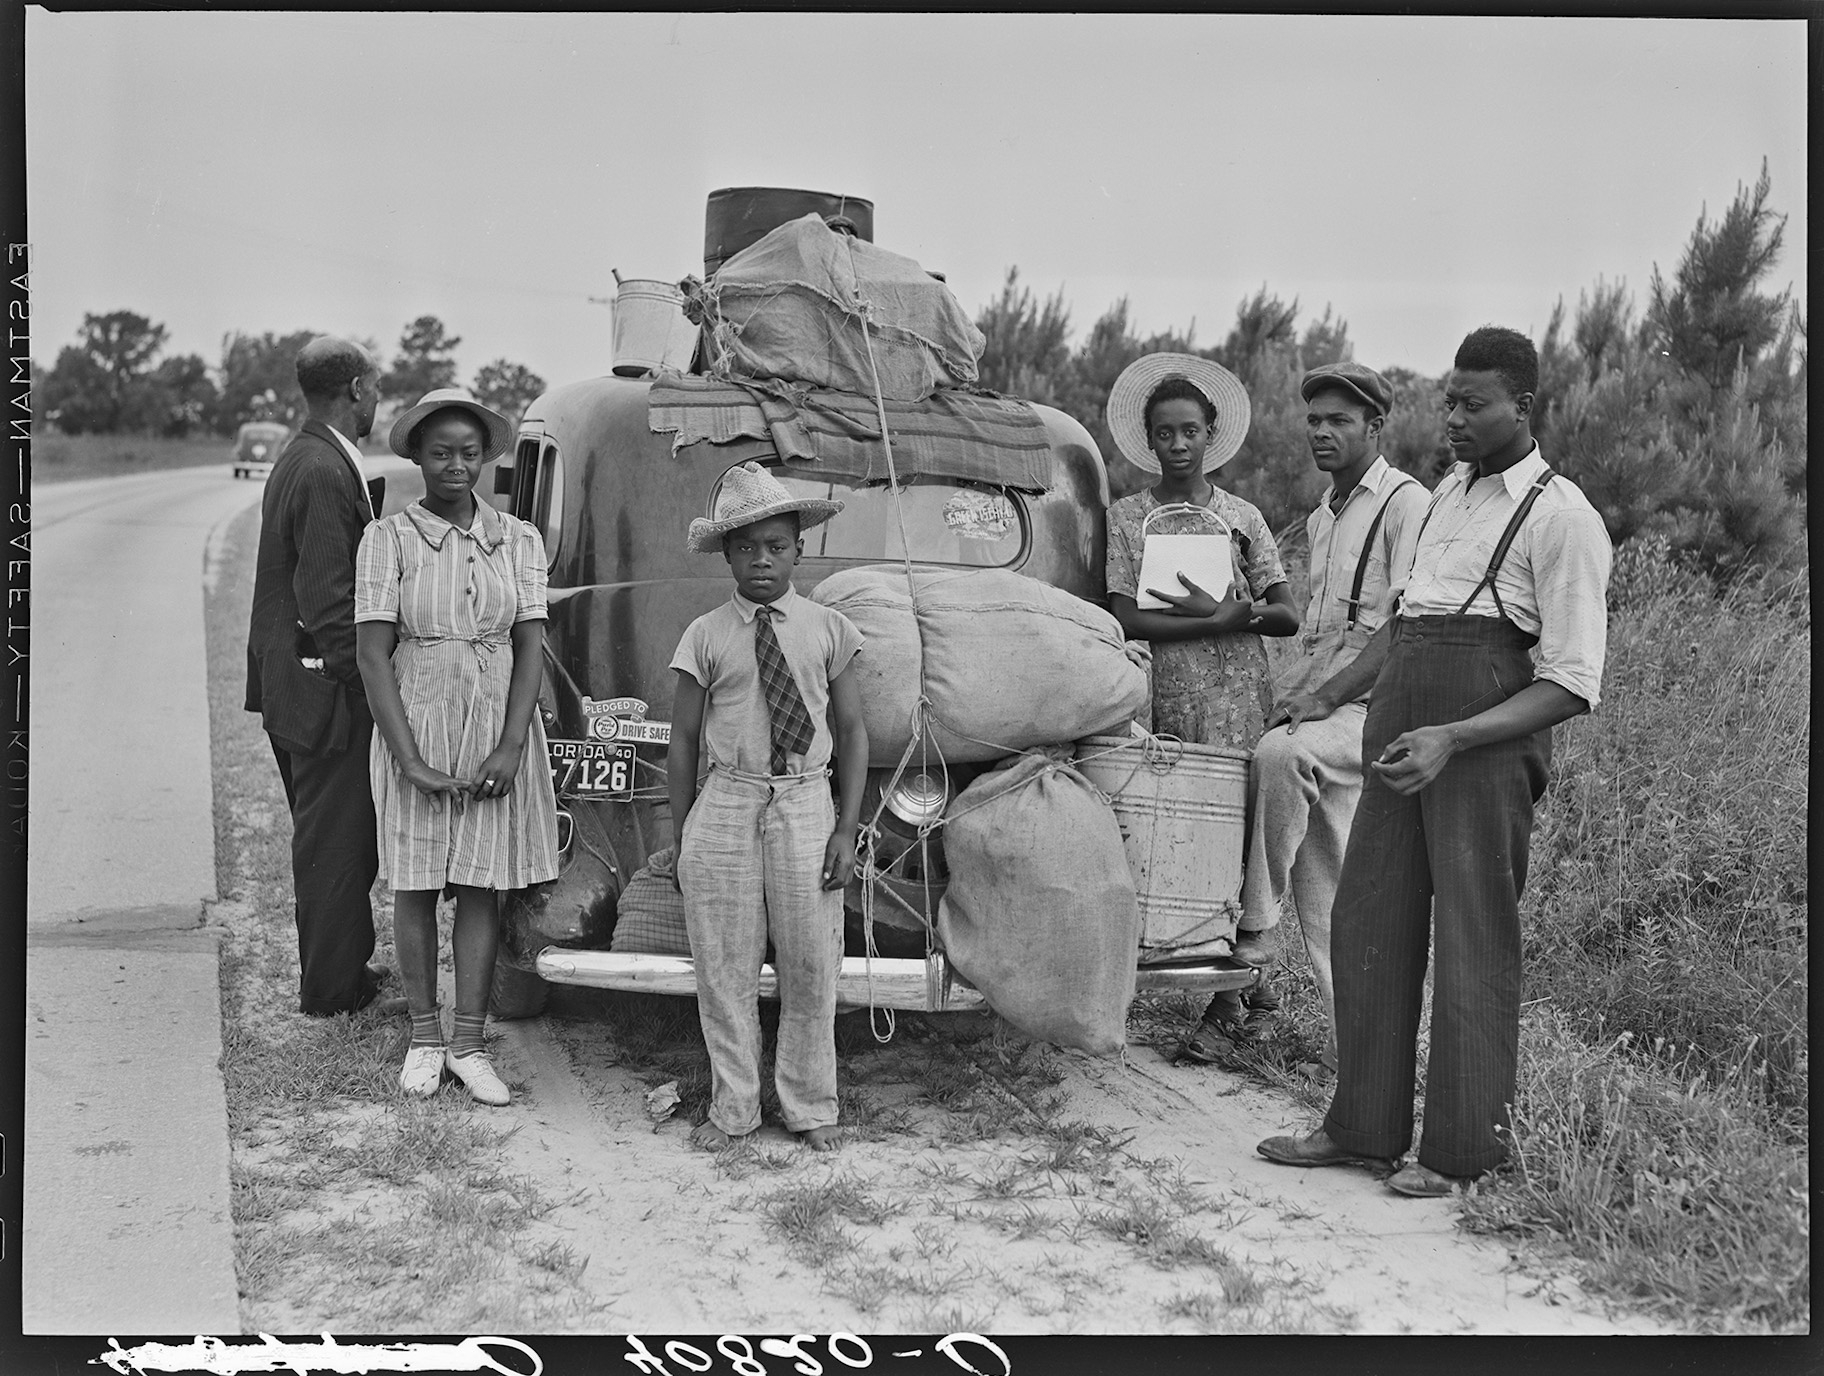 From 1915 to 1970, Black southerners ventured to the North and West in search of better jobs and freedom from racial terrorism. These travelers from Florida were headed to Cranberry, New Jersey to pick potatoes in 1940.